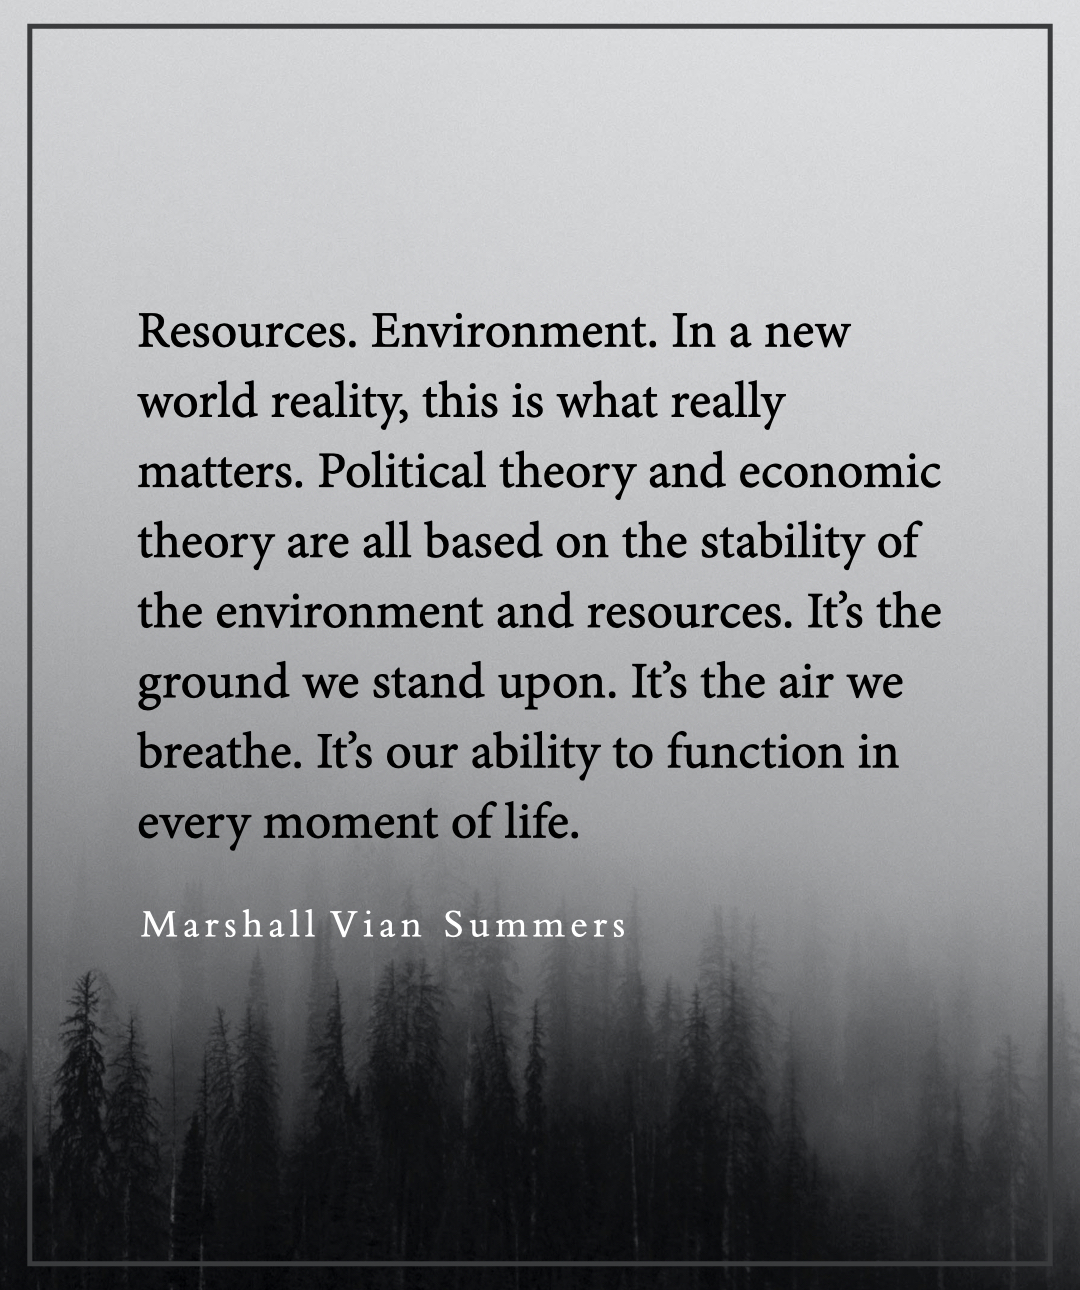 Resources, environment and a new world reality.